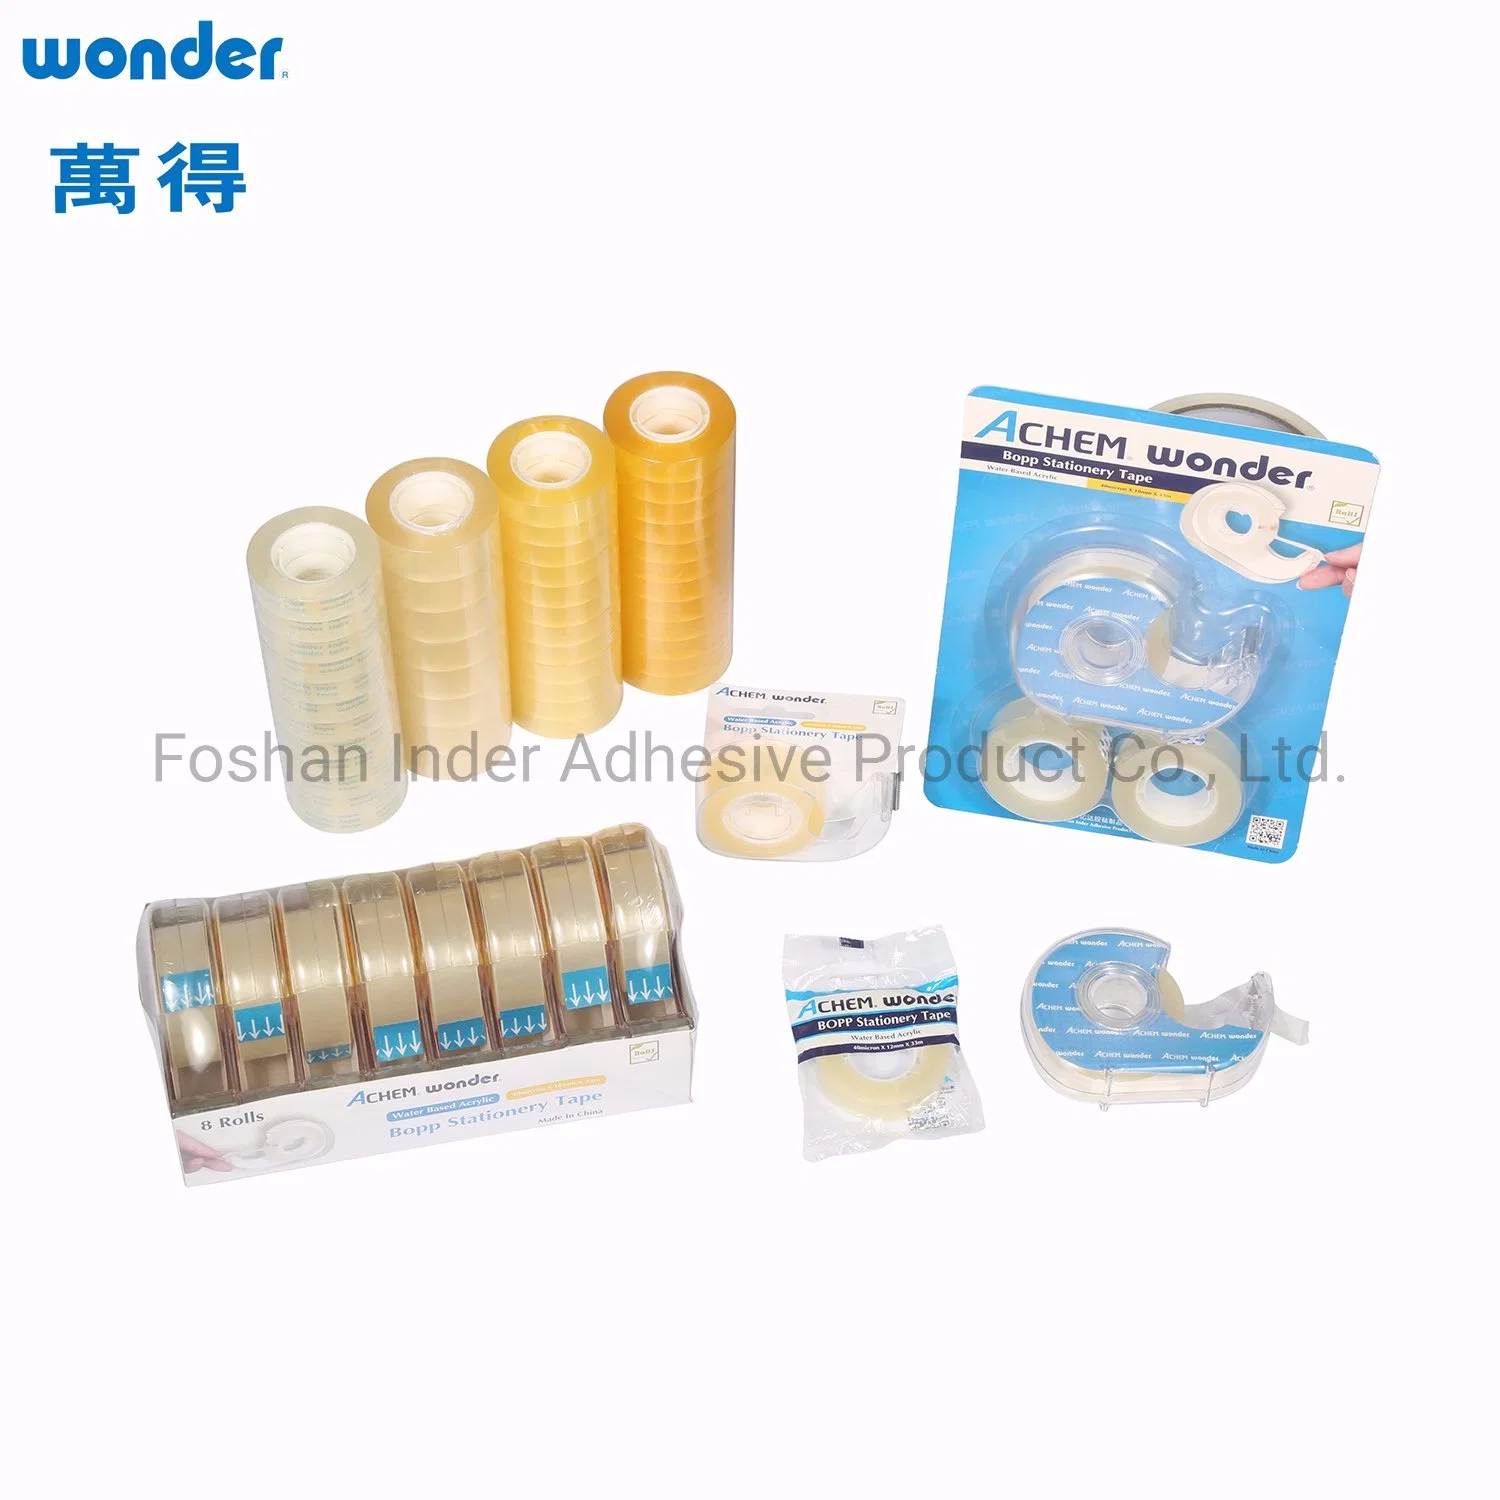 Wonder Brand Reliale Quality Stationery Tape/ /BOPP Tape Dispenser/ /Cutter for Office